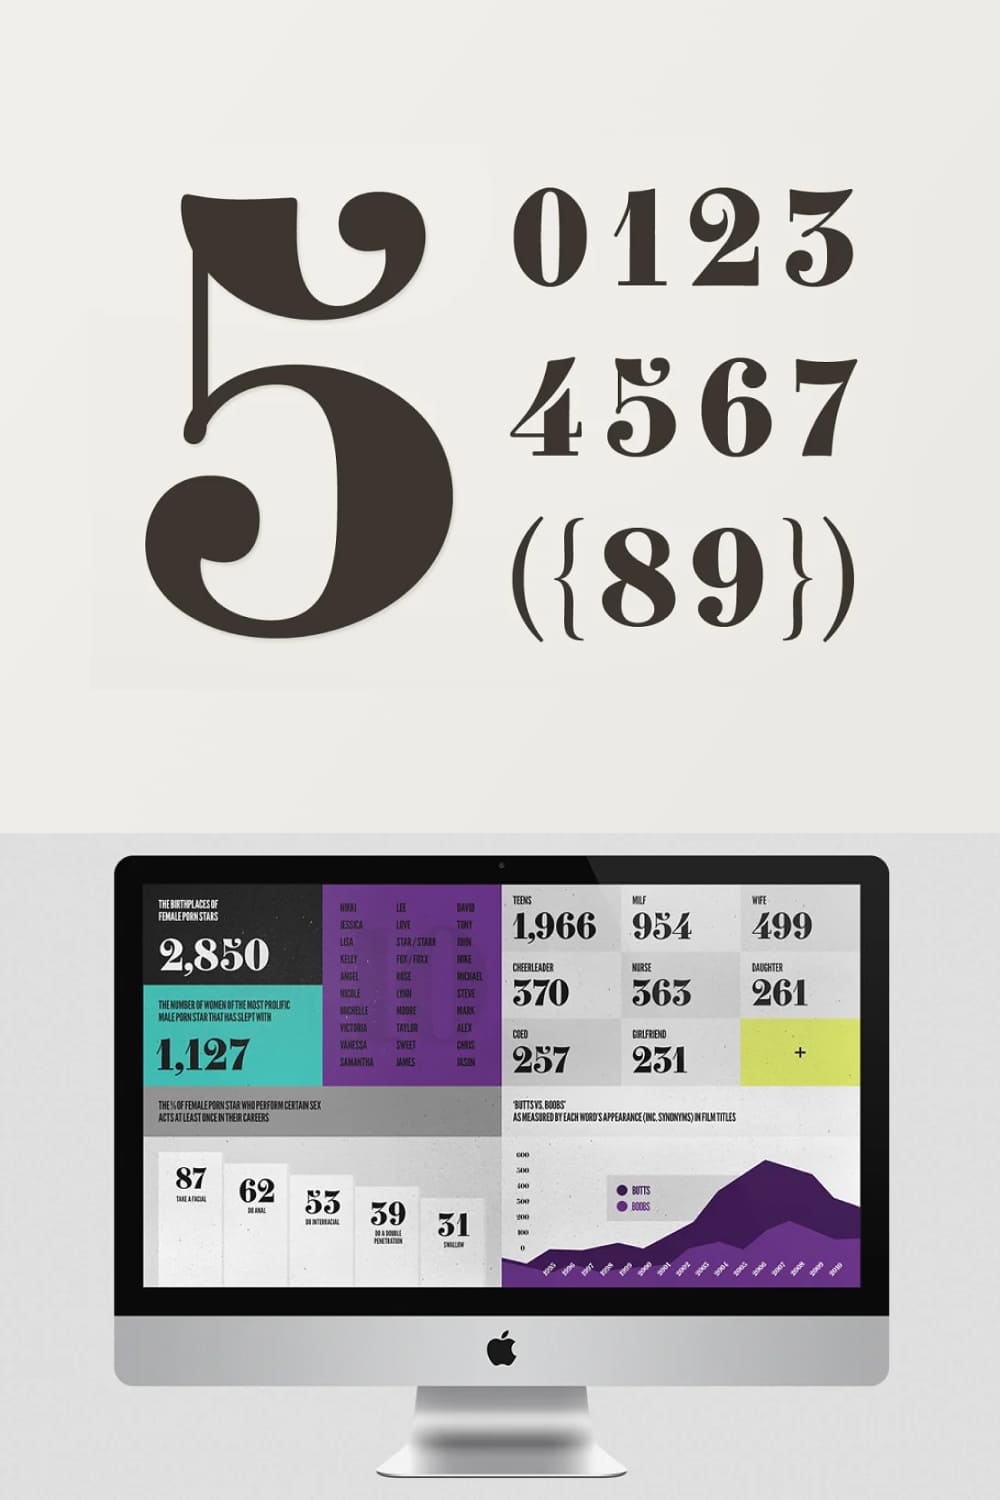 An example of a Clement Numbers font in an infographic on a monitor screen.